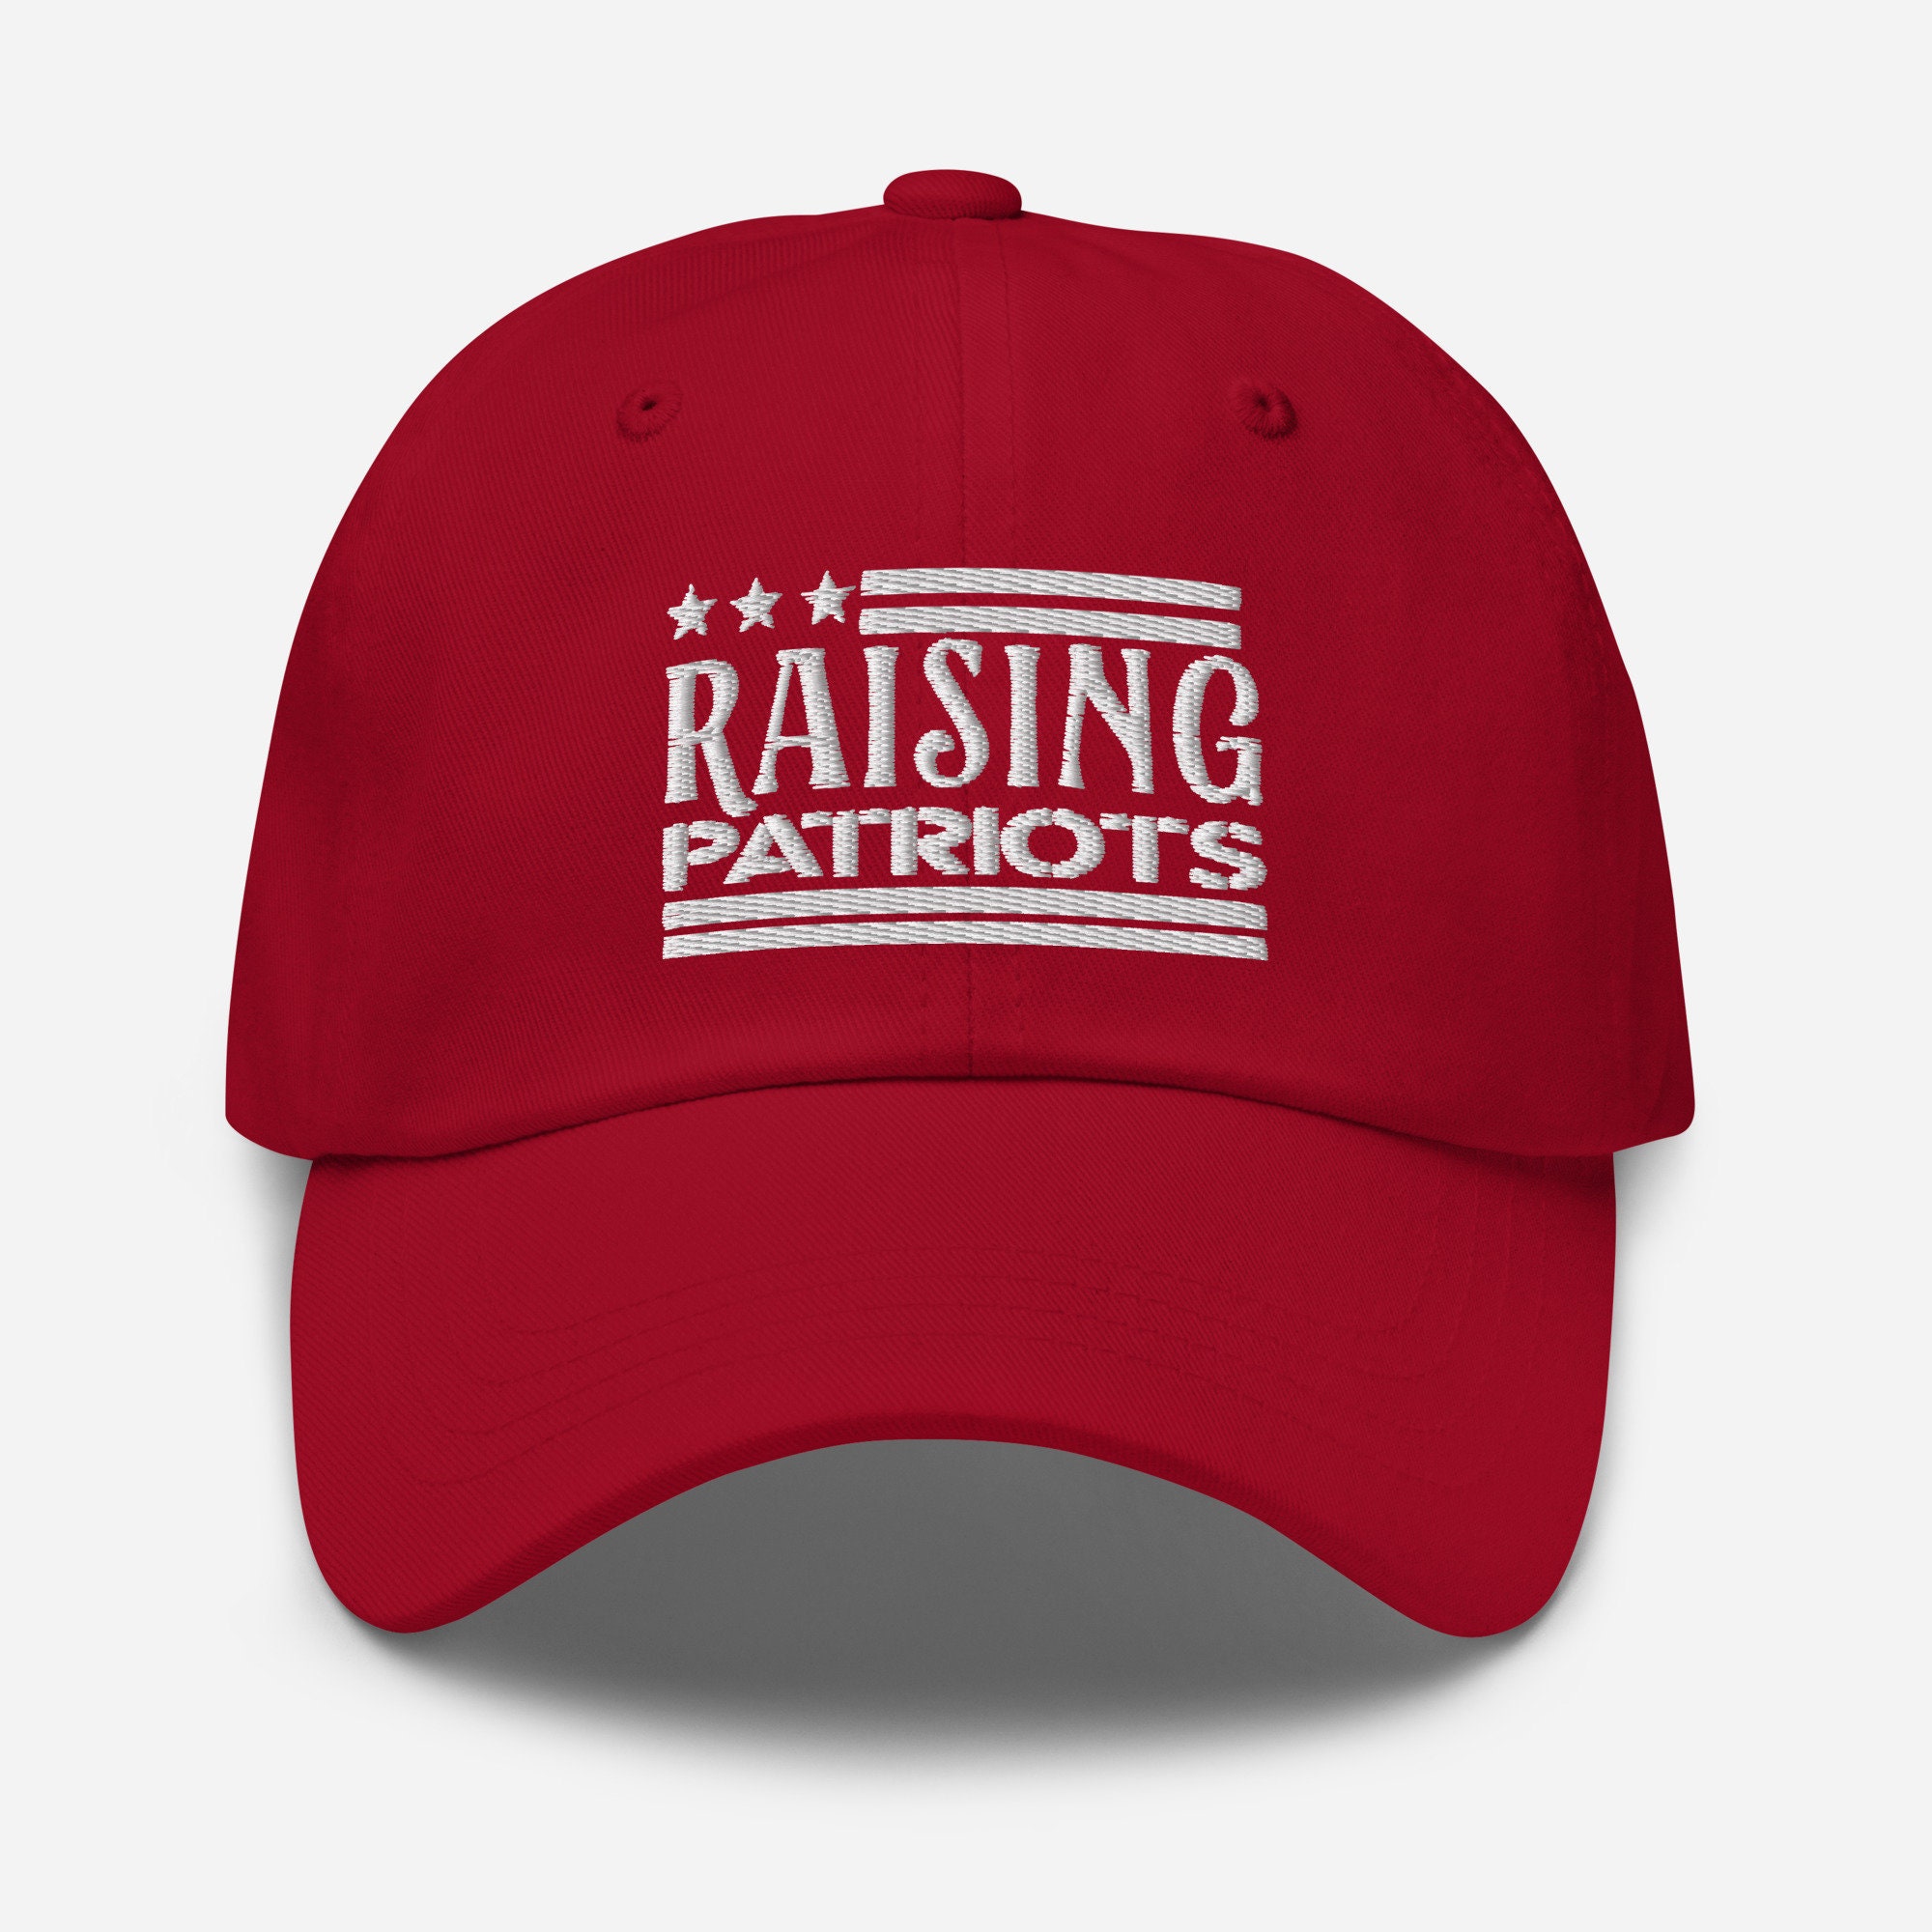 Raising Patriots Father's Day Embroidered Hat